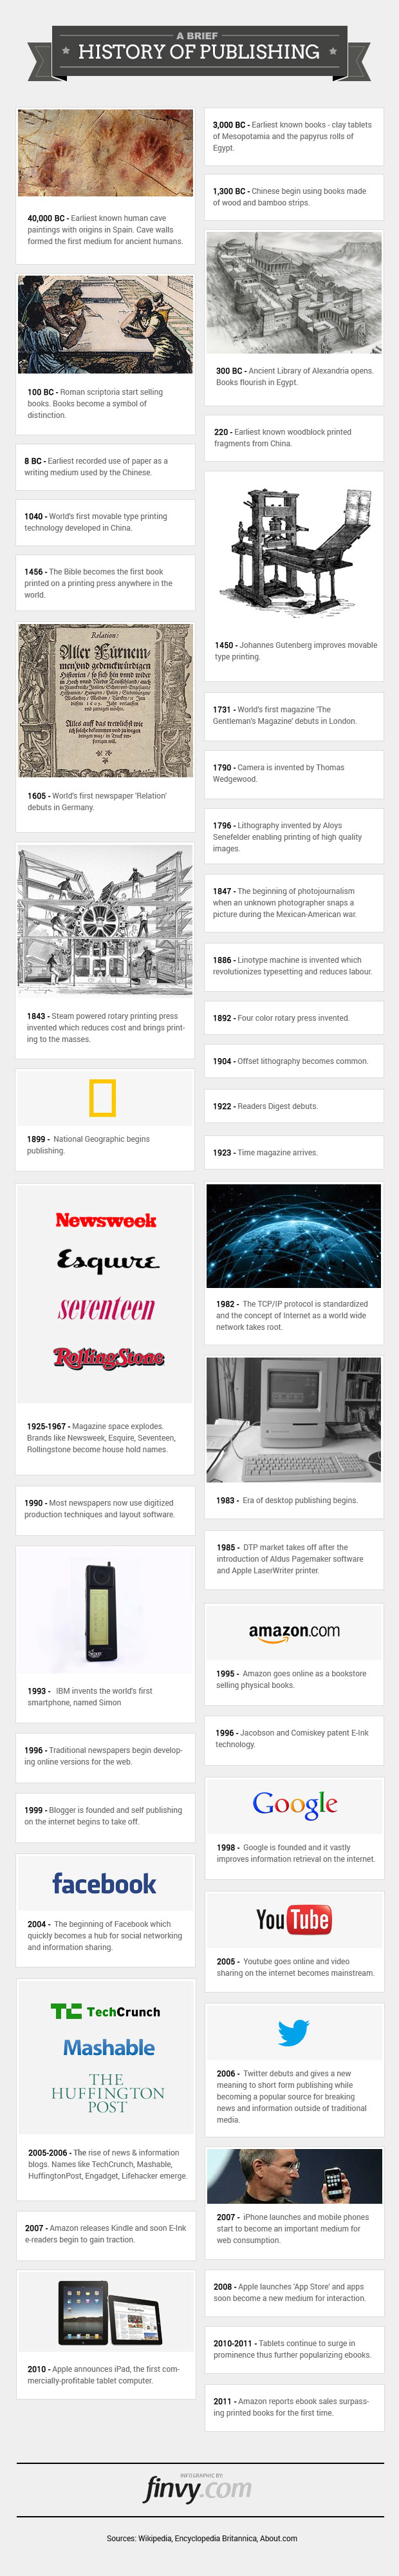 A Brief History of Publishing: Infographic by Finvy